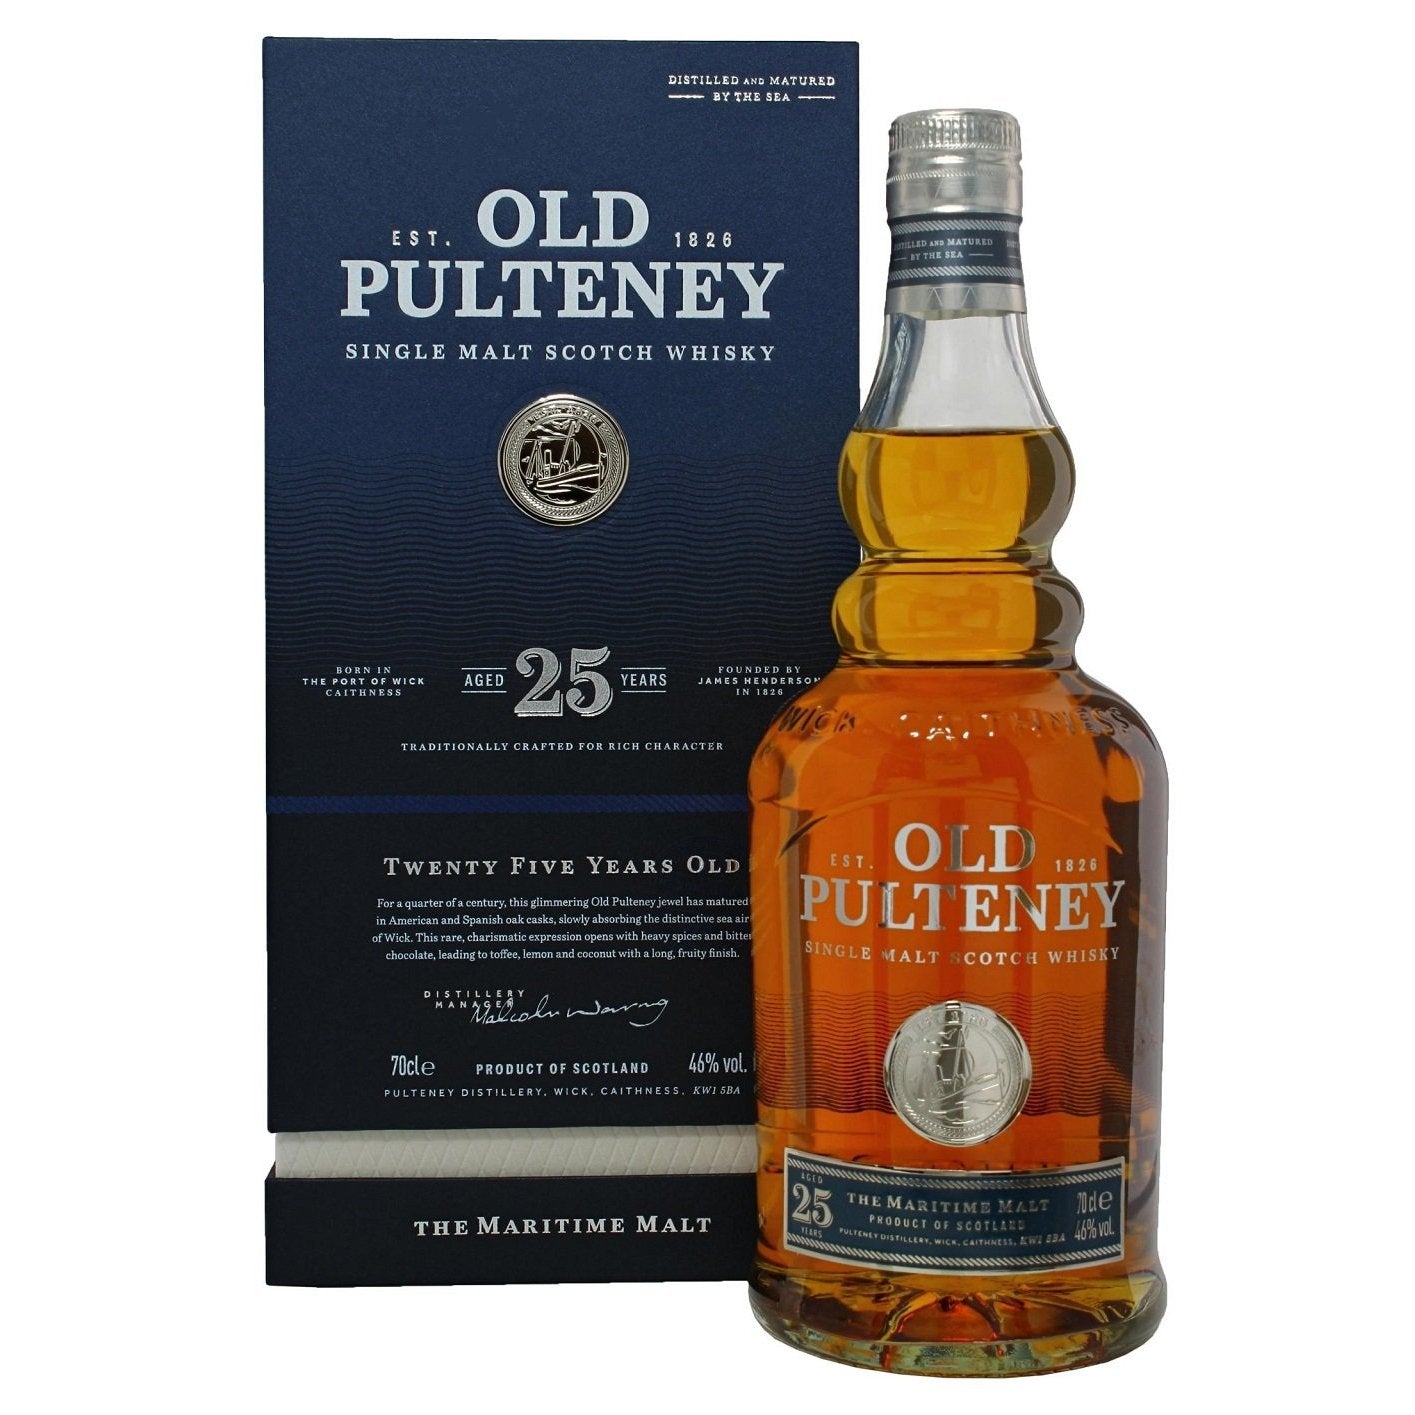 Old Pulteney 25 Years Old Single Malt Scotch Whisky 46% Vol. 0,7l in Giftbox